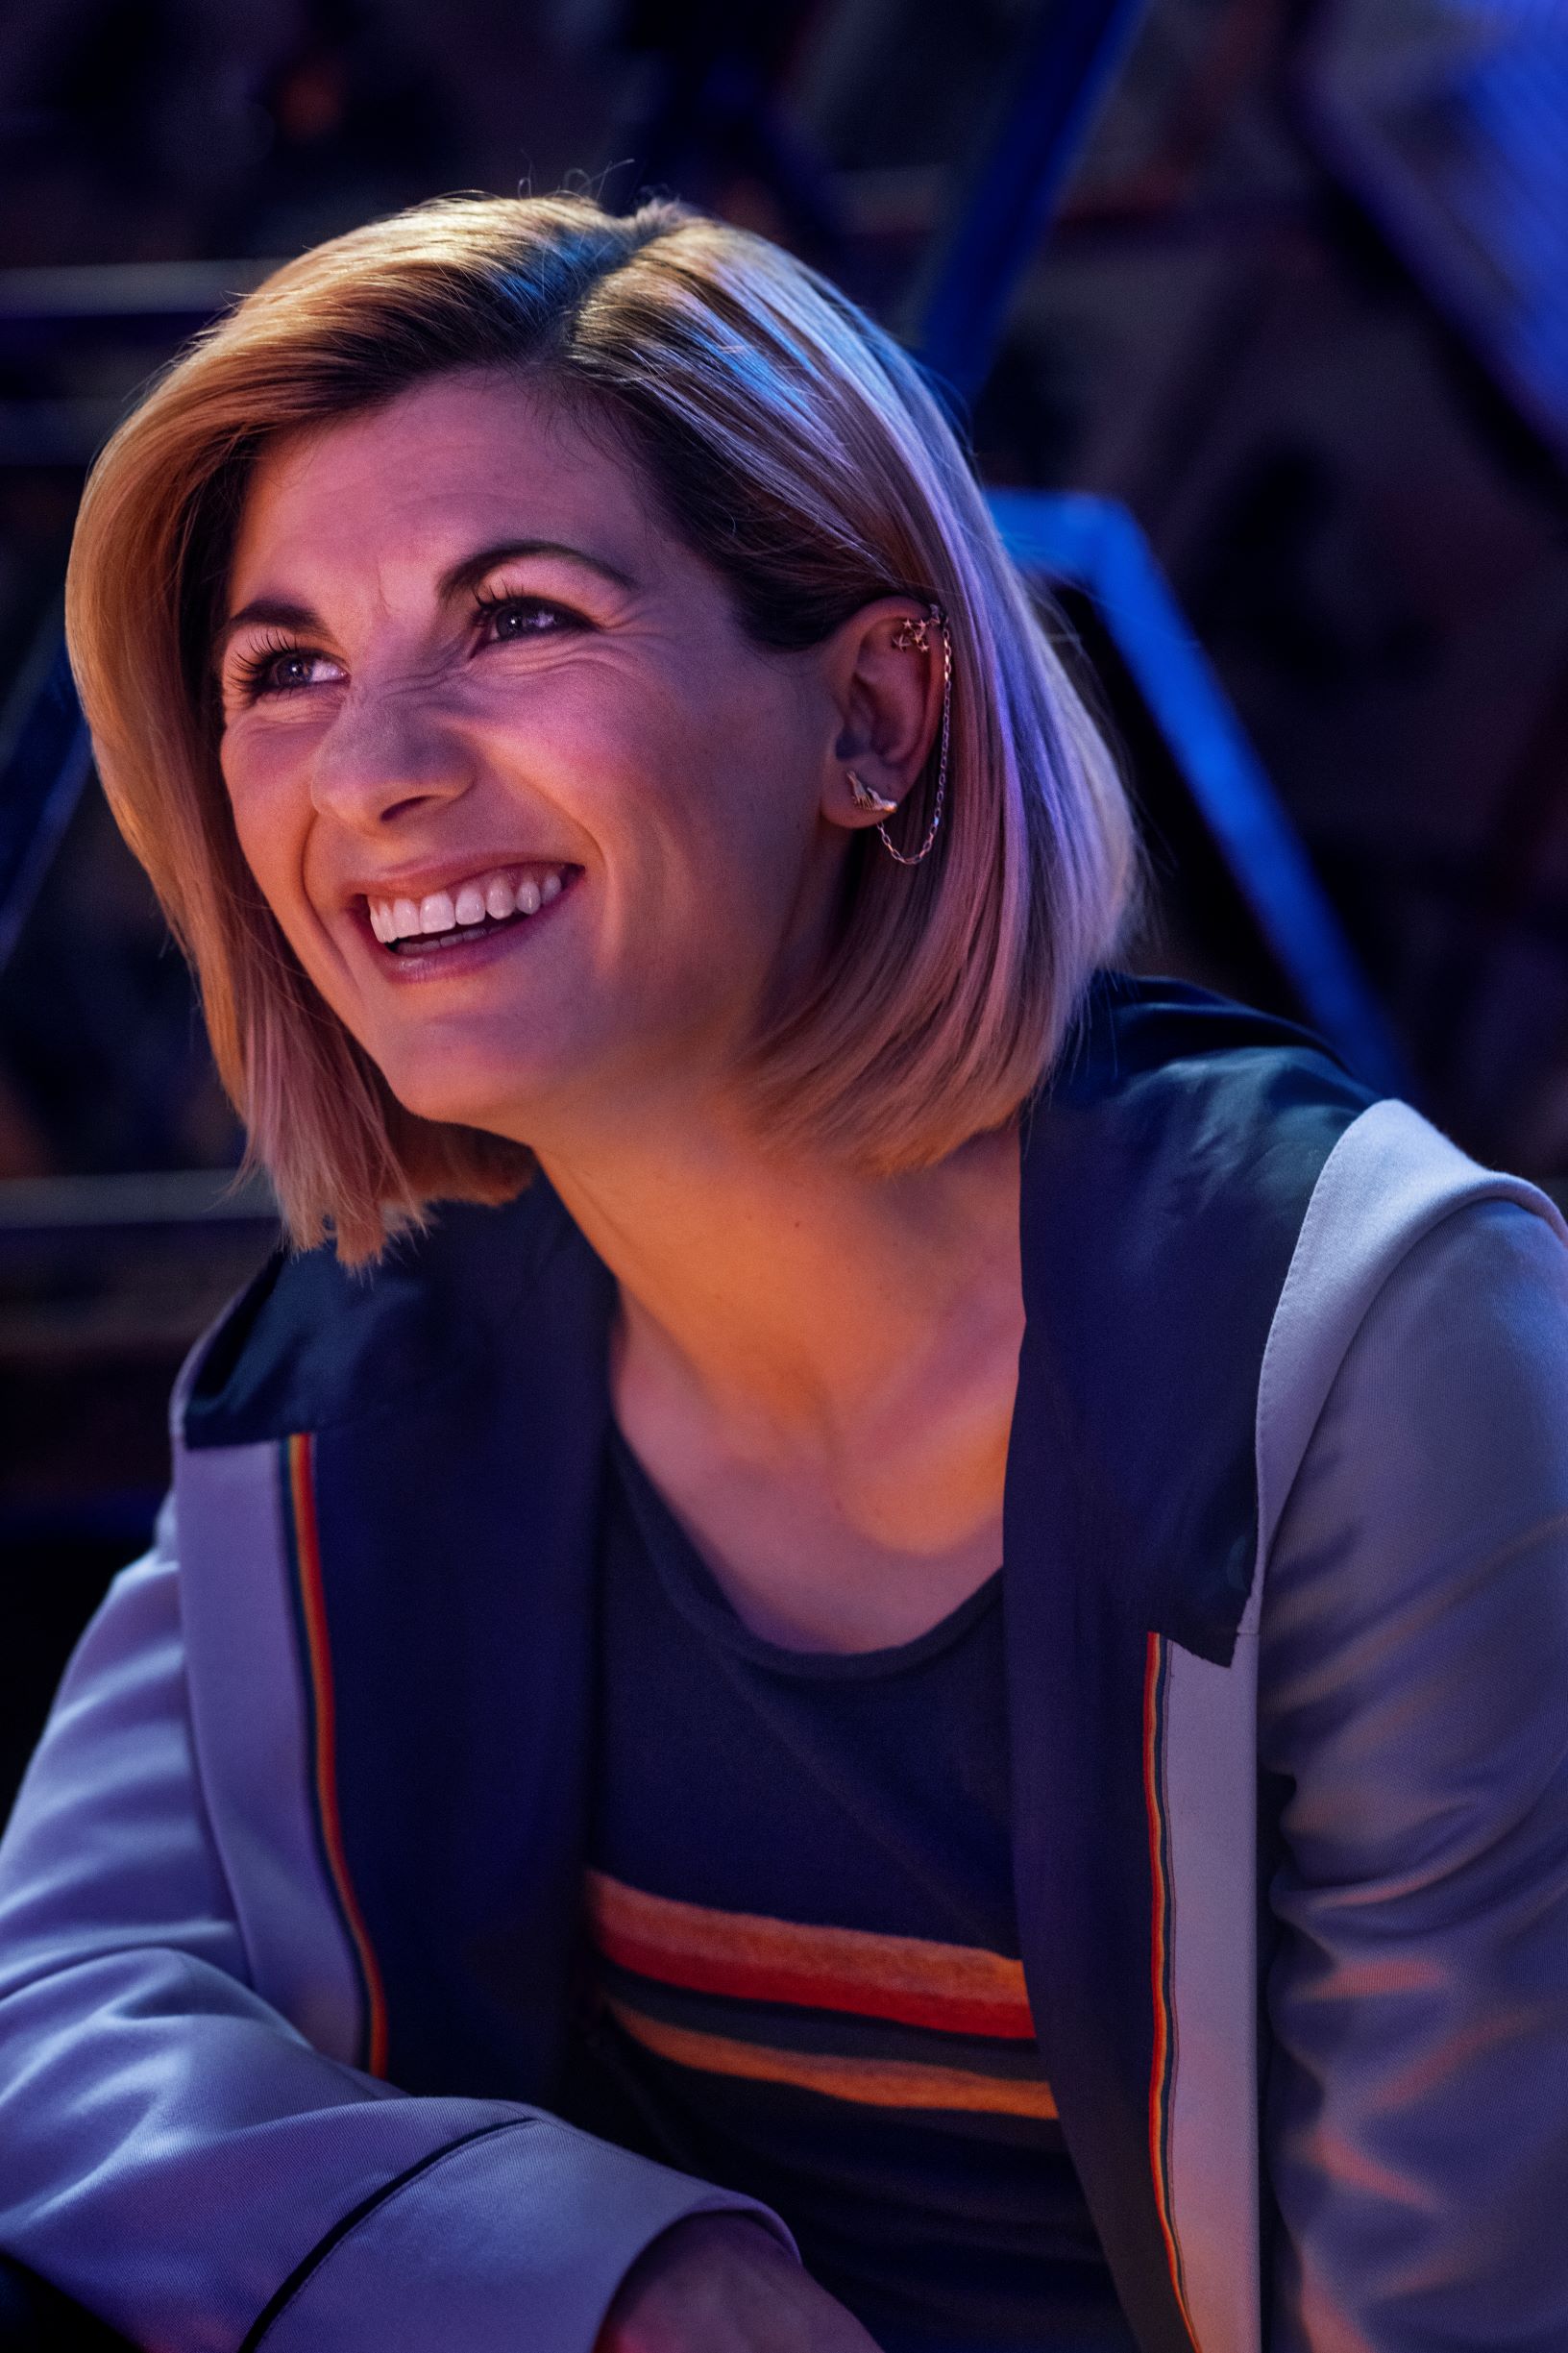 Jodie doctor who 12